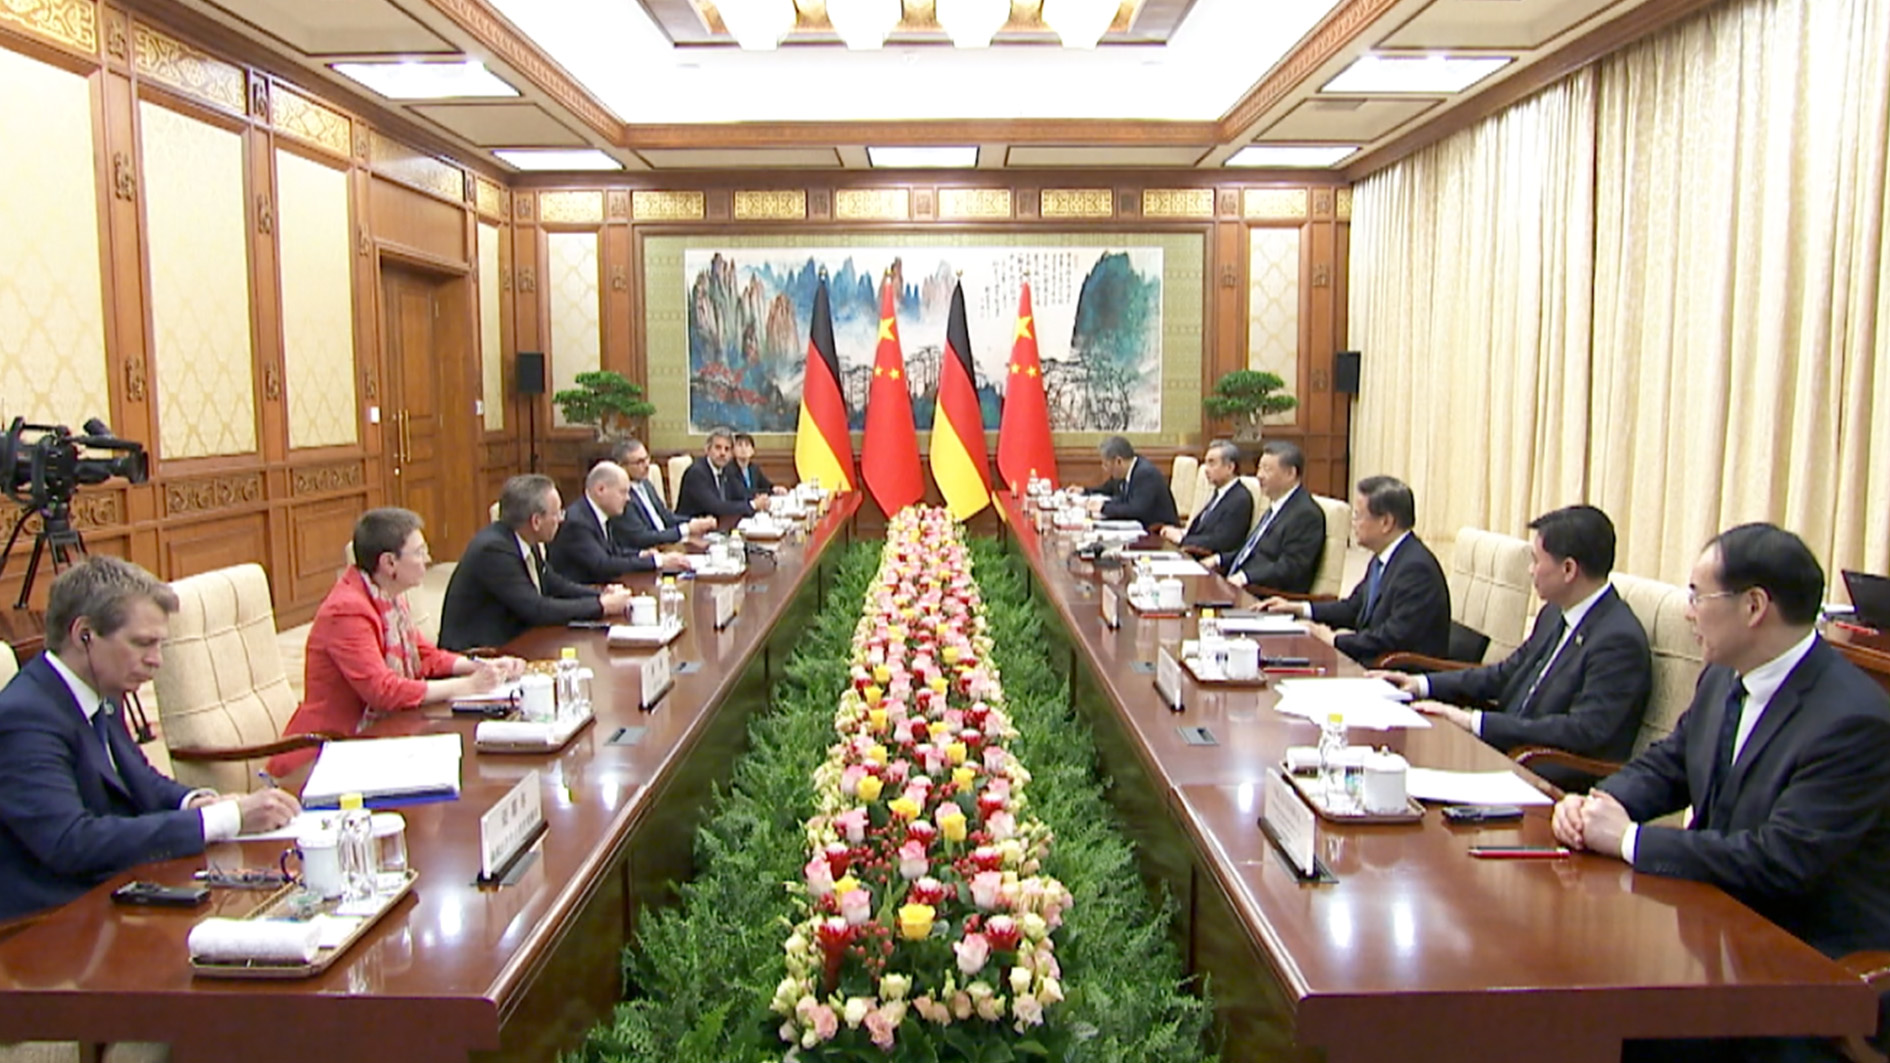 President Xi: China-Germany cooperation not 'risk' but opportunity